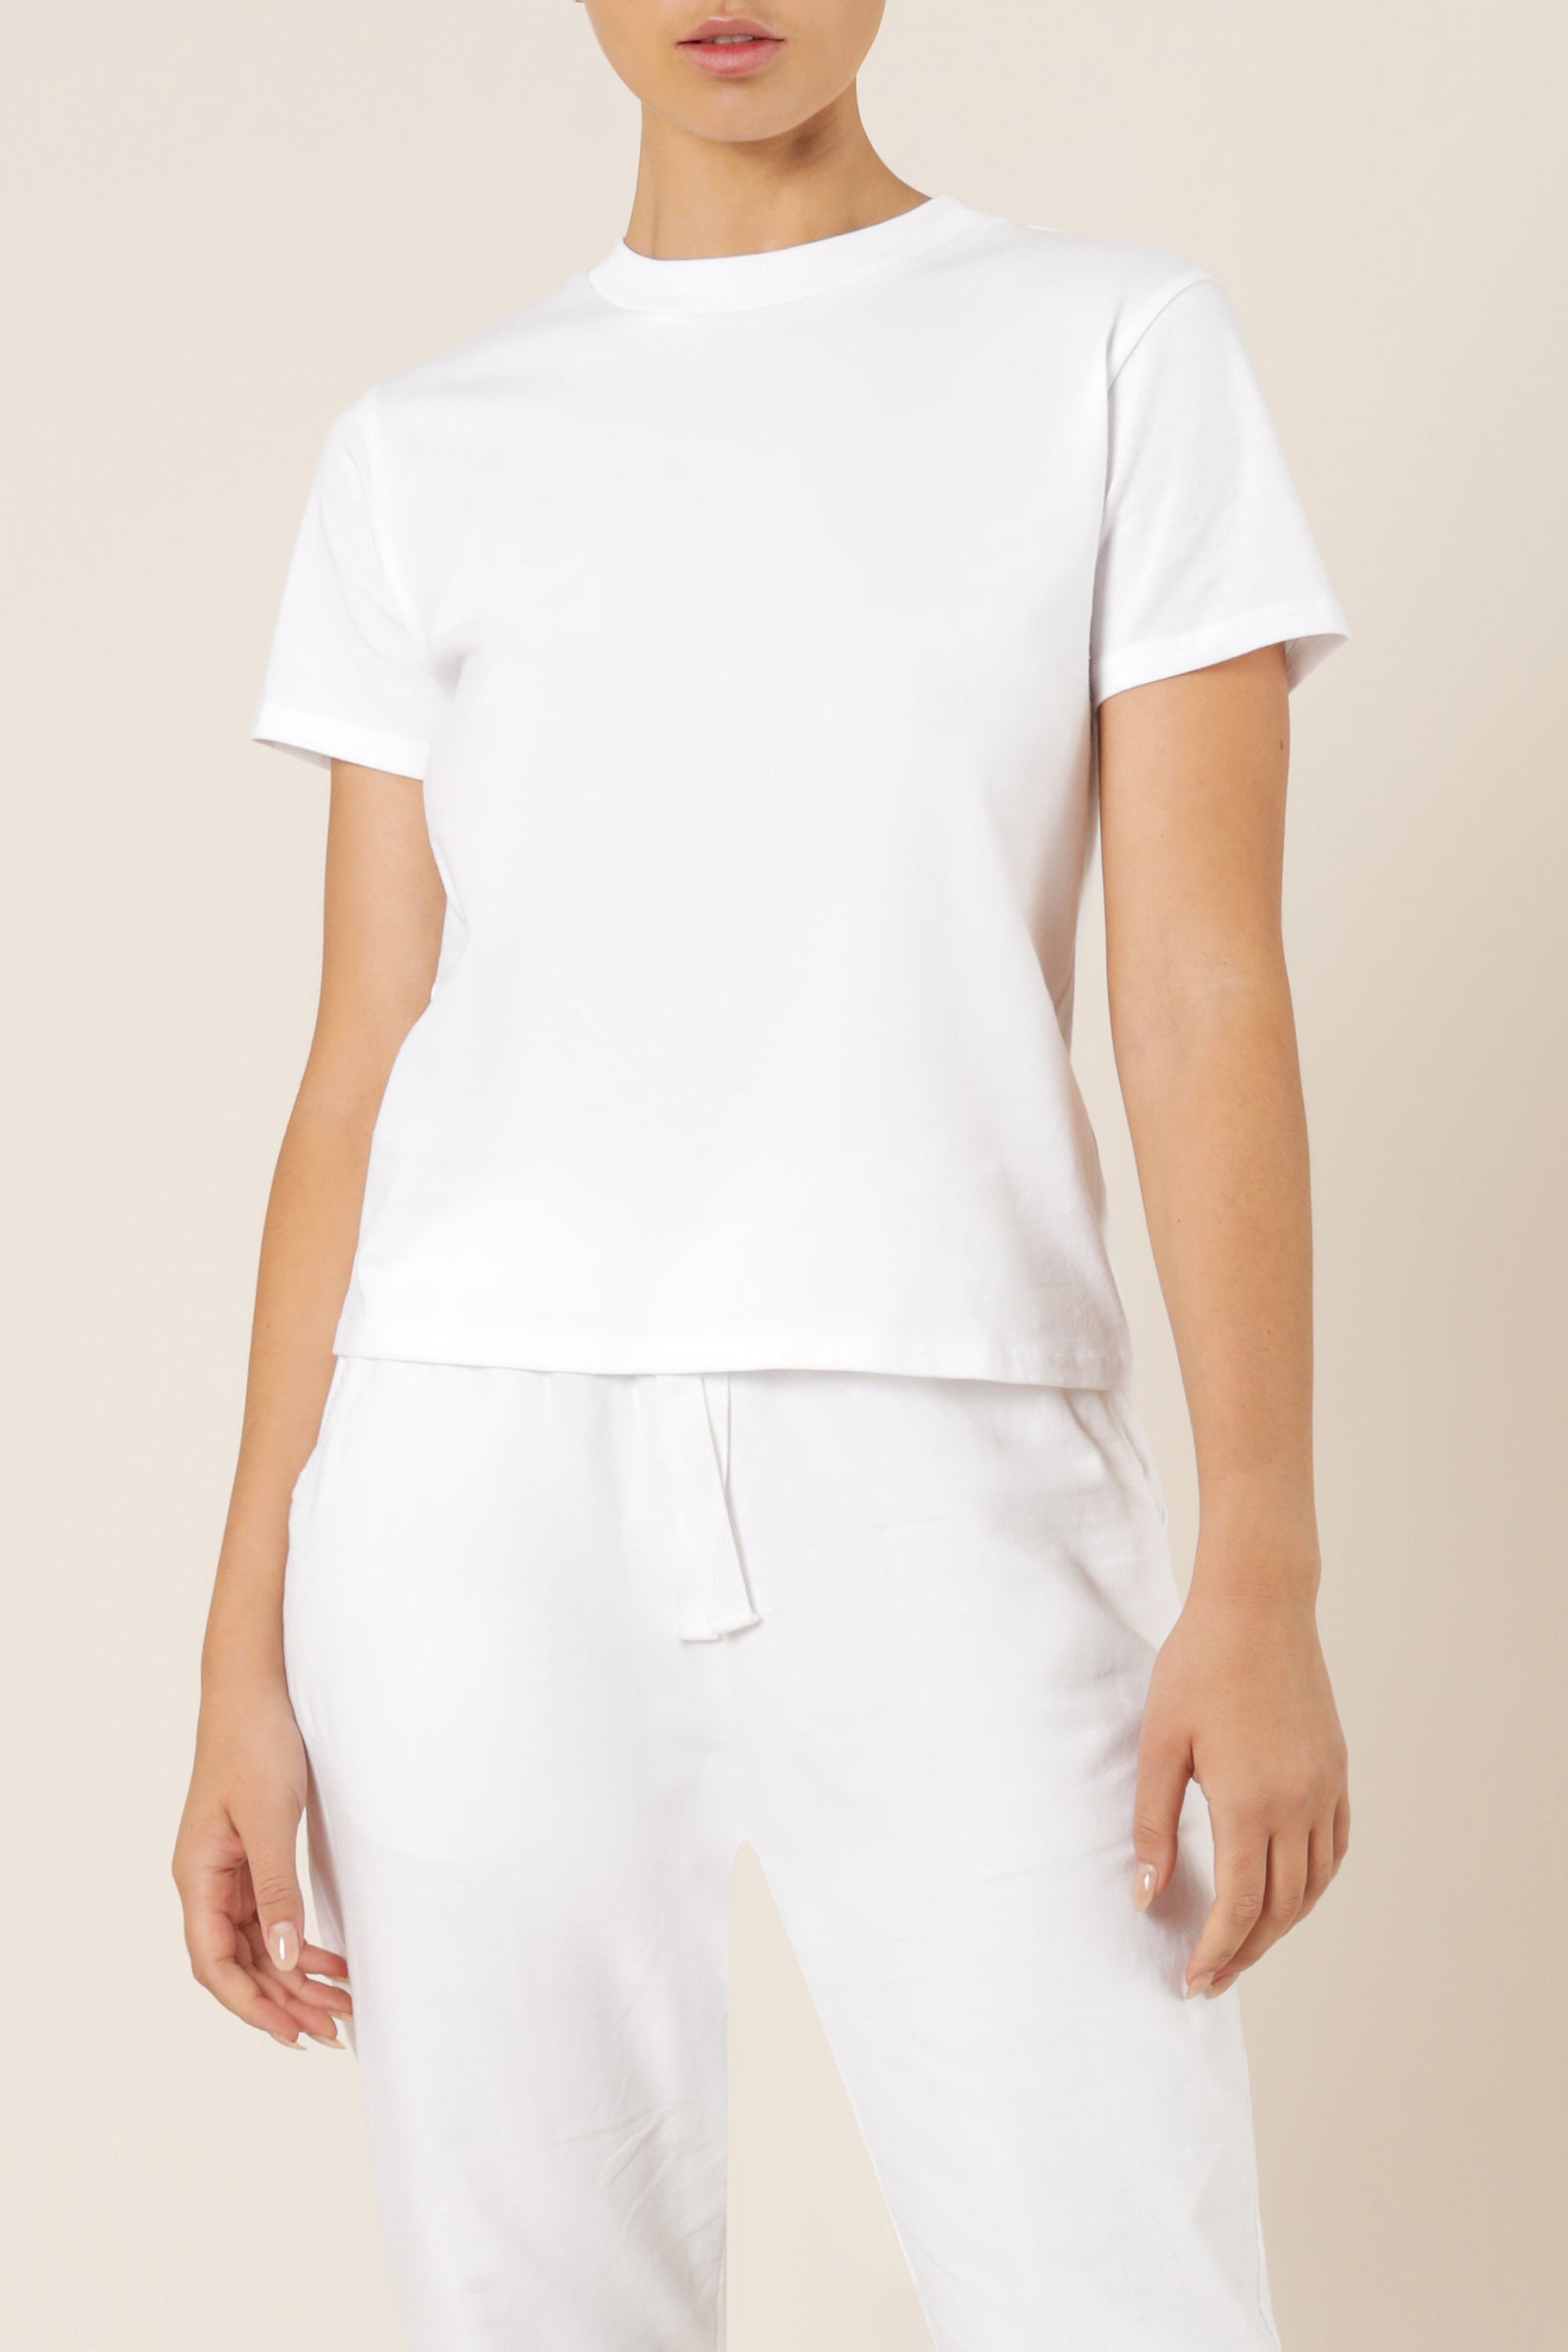 Nude Lucy Kendall Crew Neck Tee White Top 